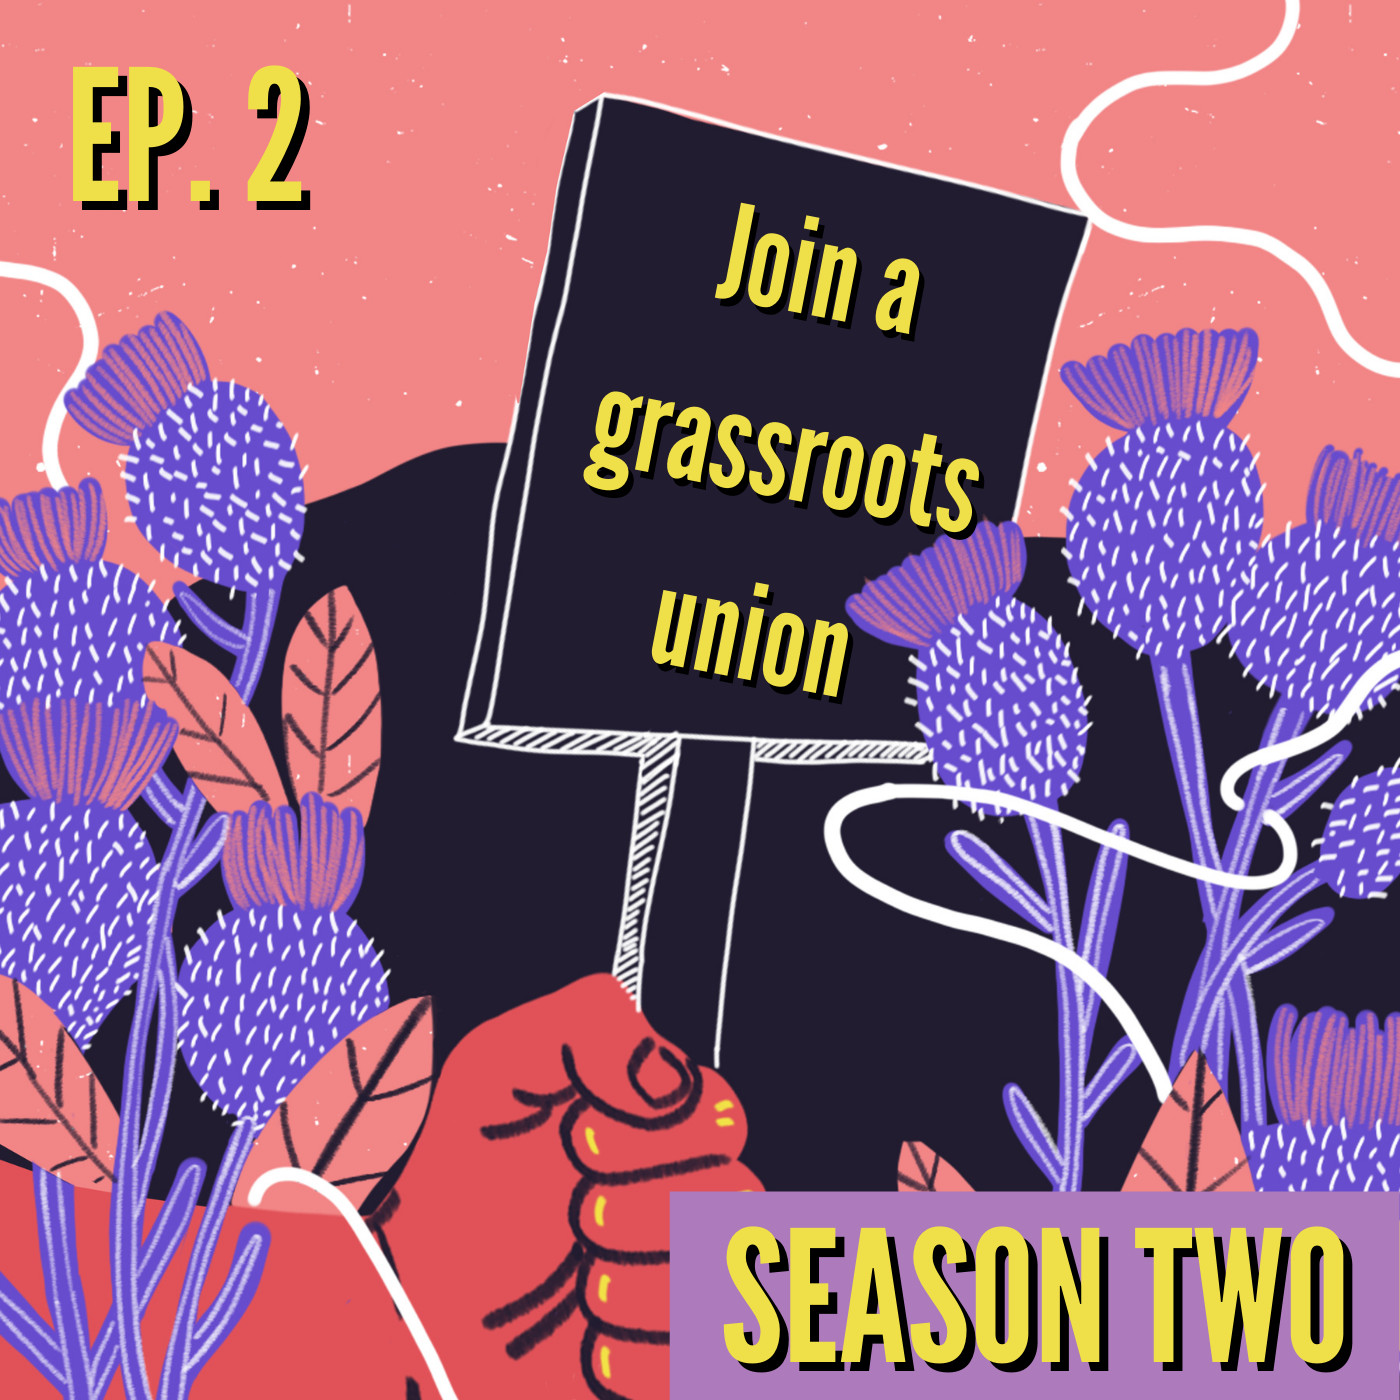 Join a grassroots union! (Henry from IWGB)